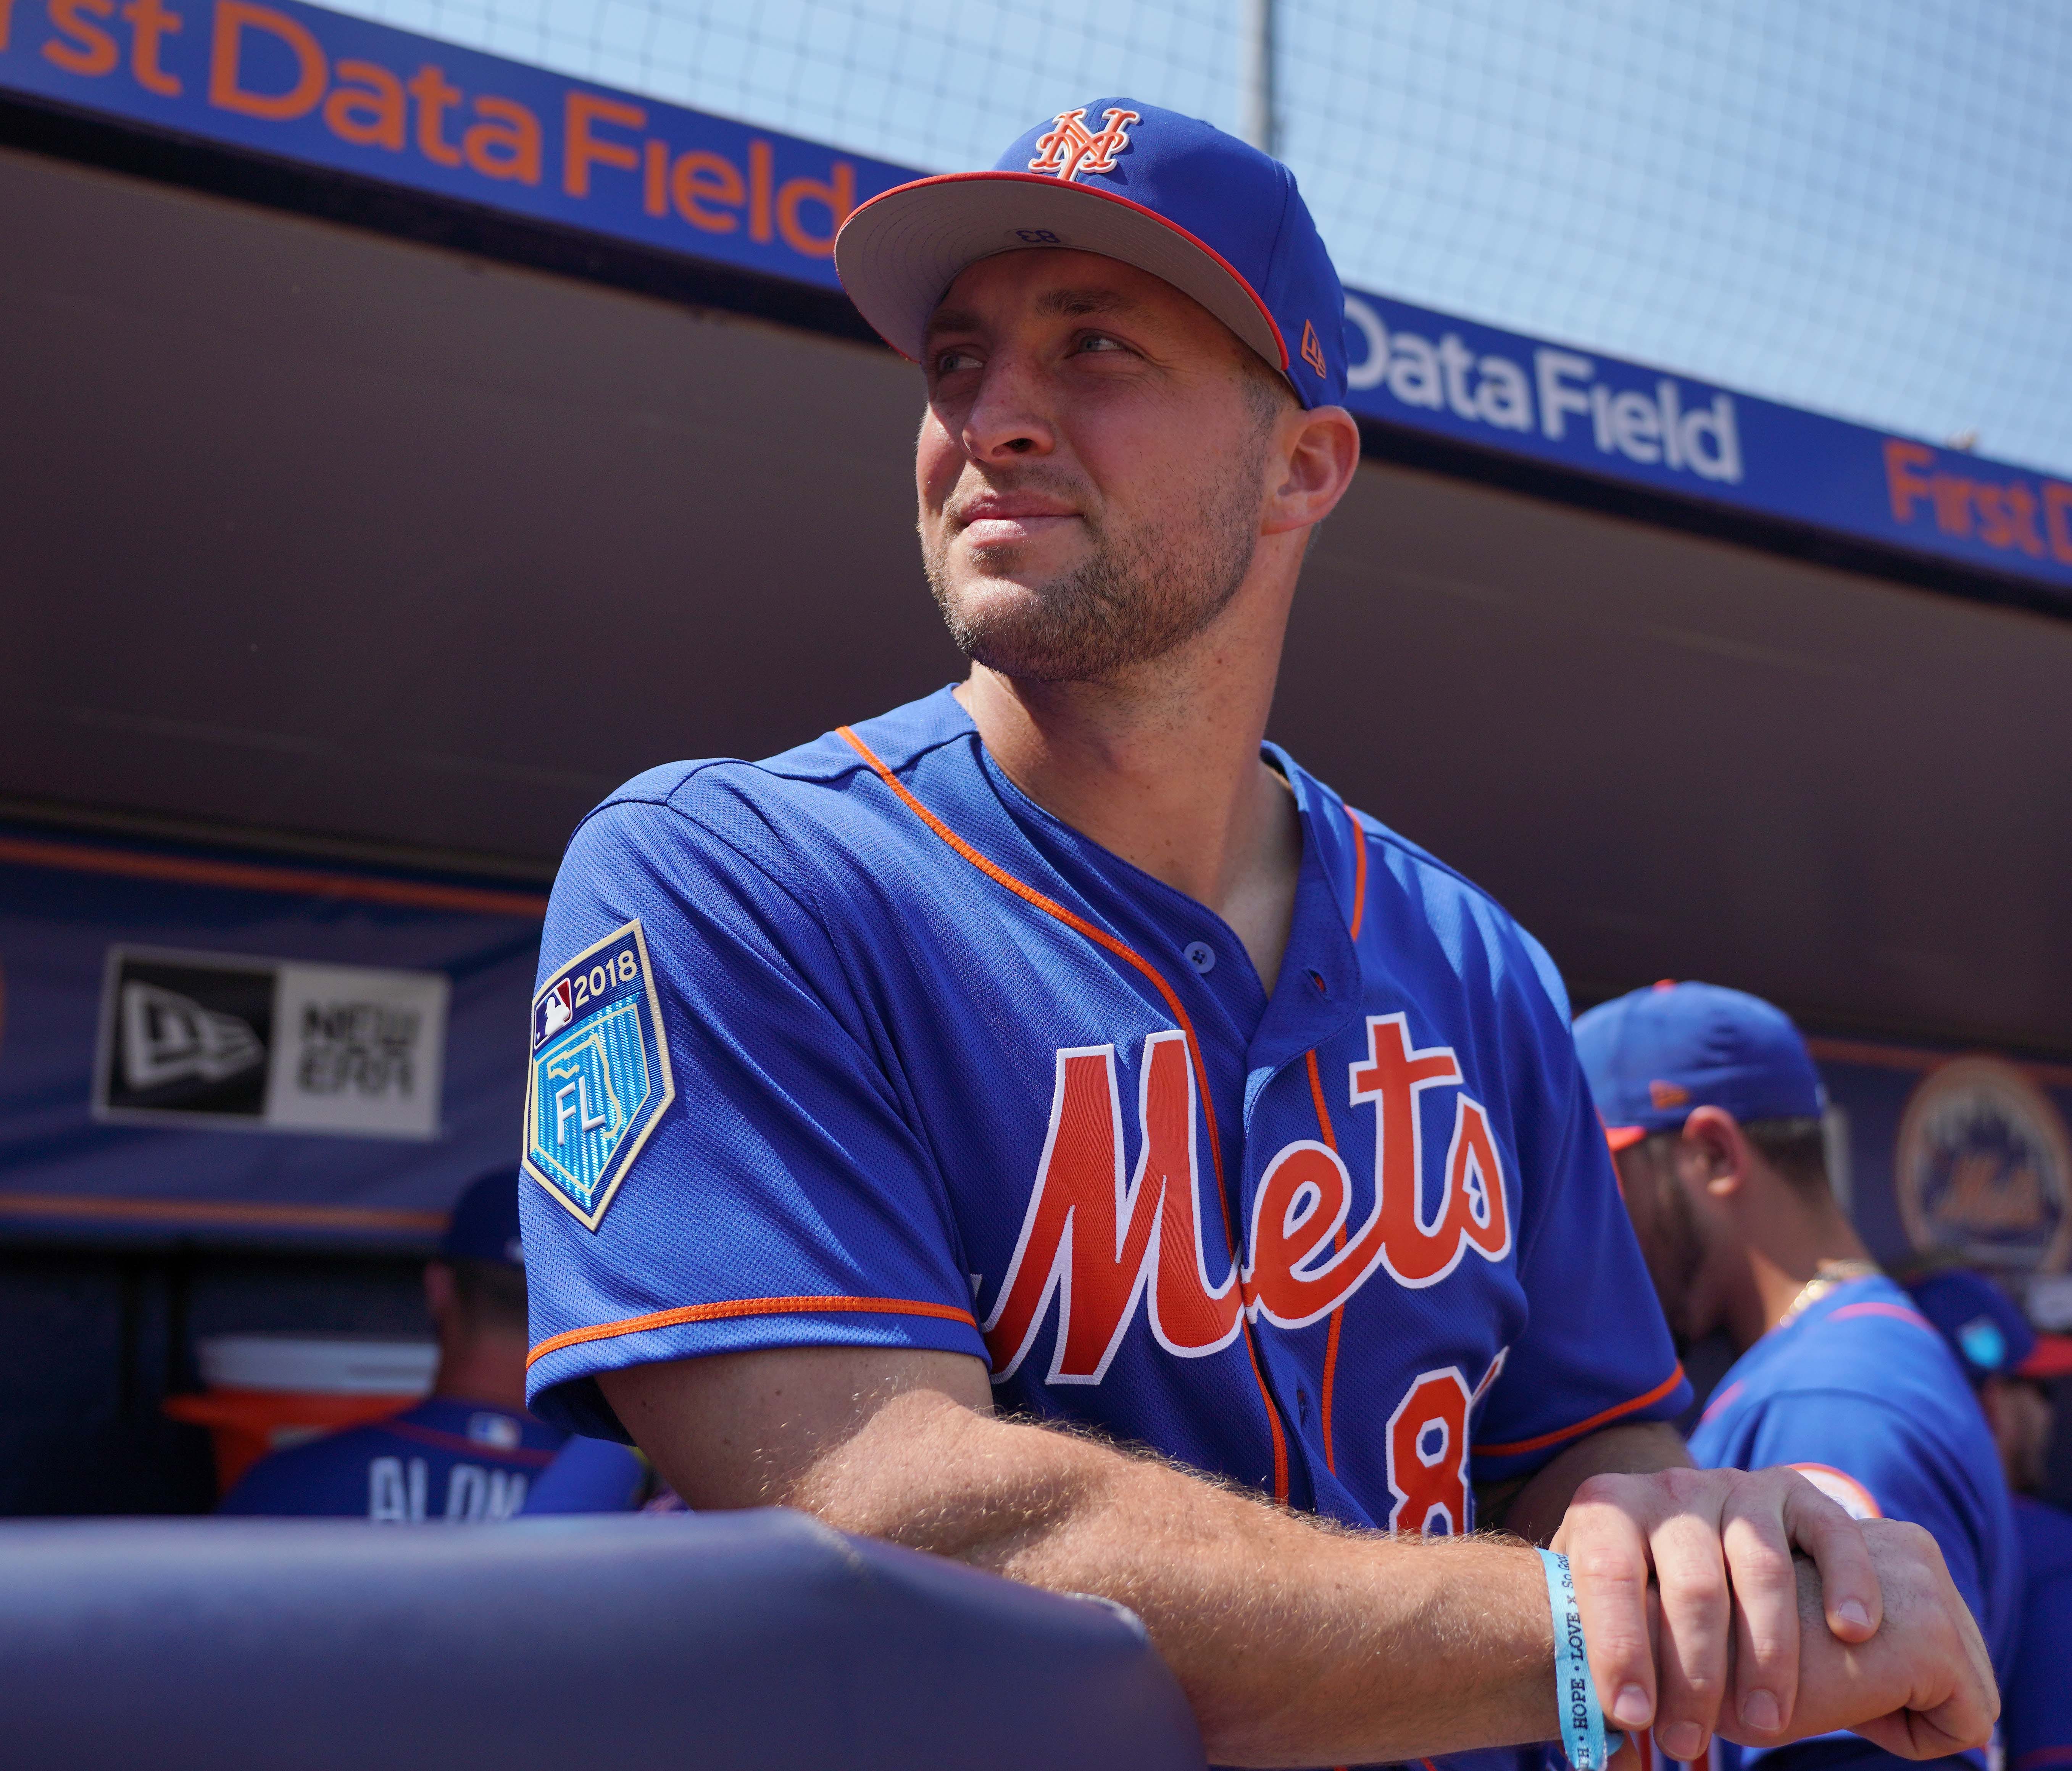 Tebow is entering his second full season as a professional baseball player.